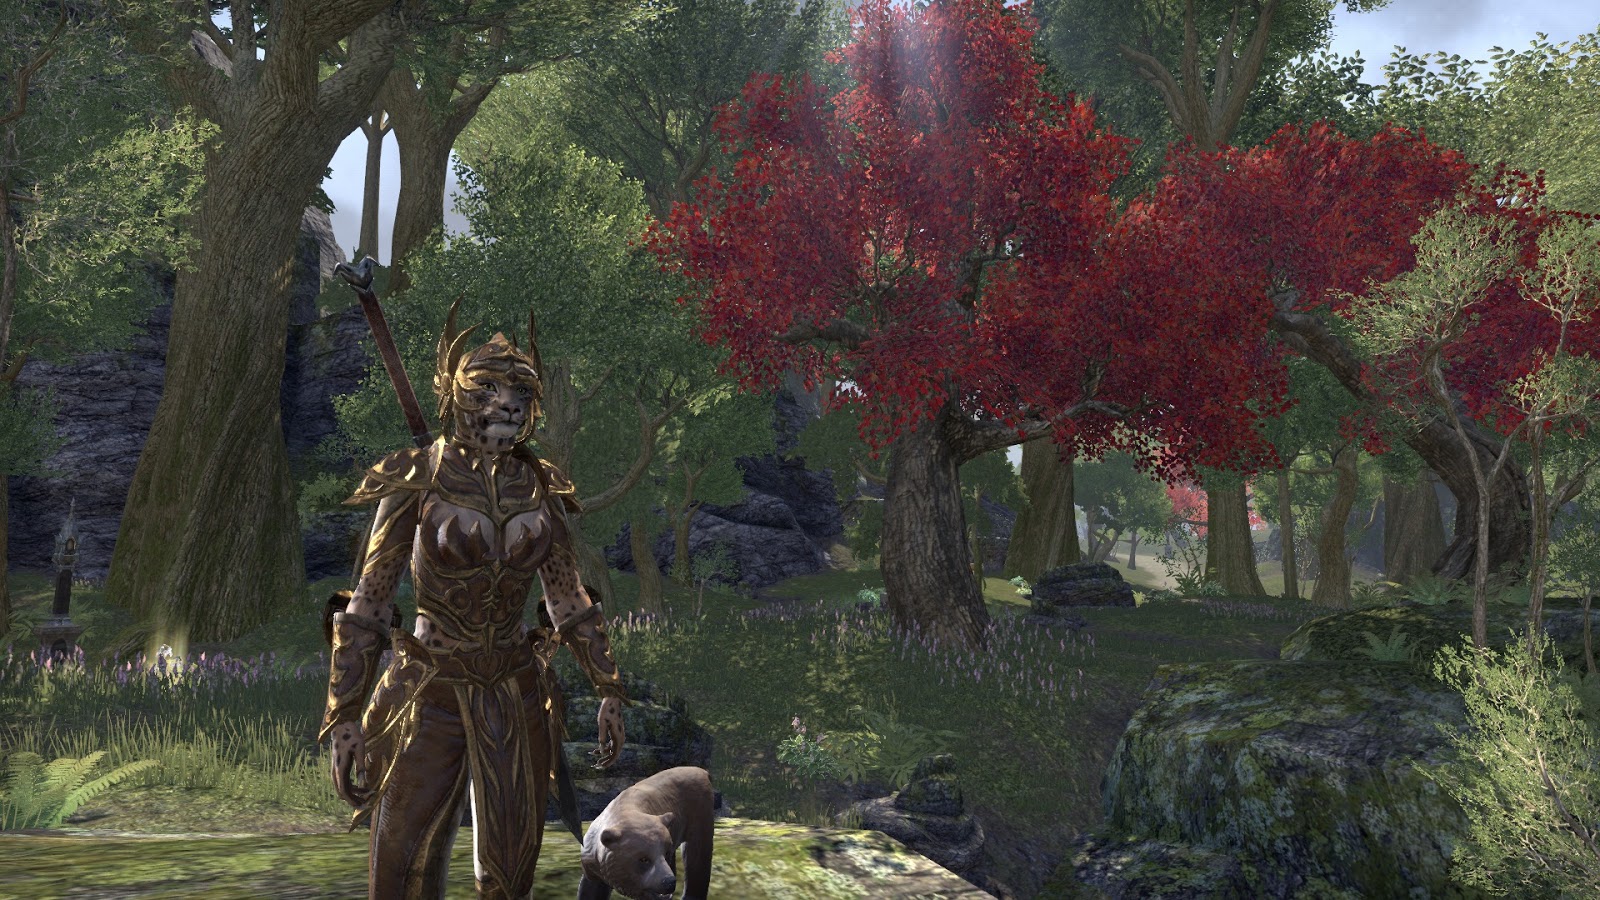 Update 35 PTS Patch Notes . . . We Were Right  The Elder Scrolls Online -  Lost Depths 